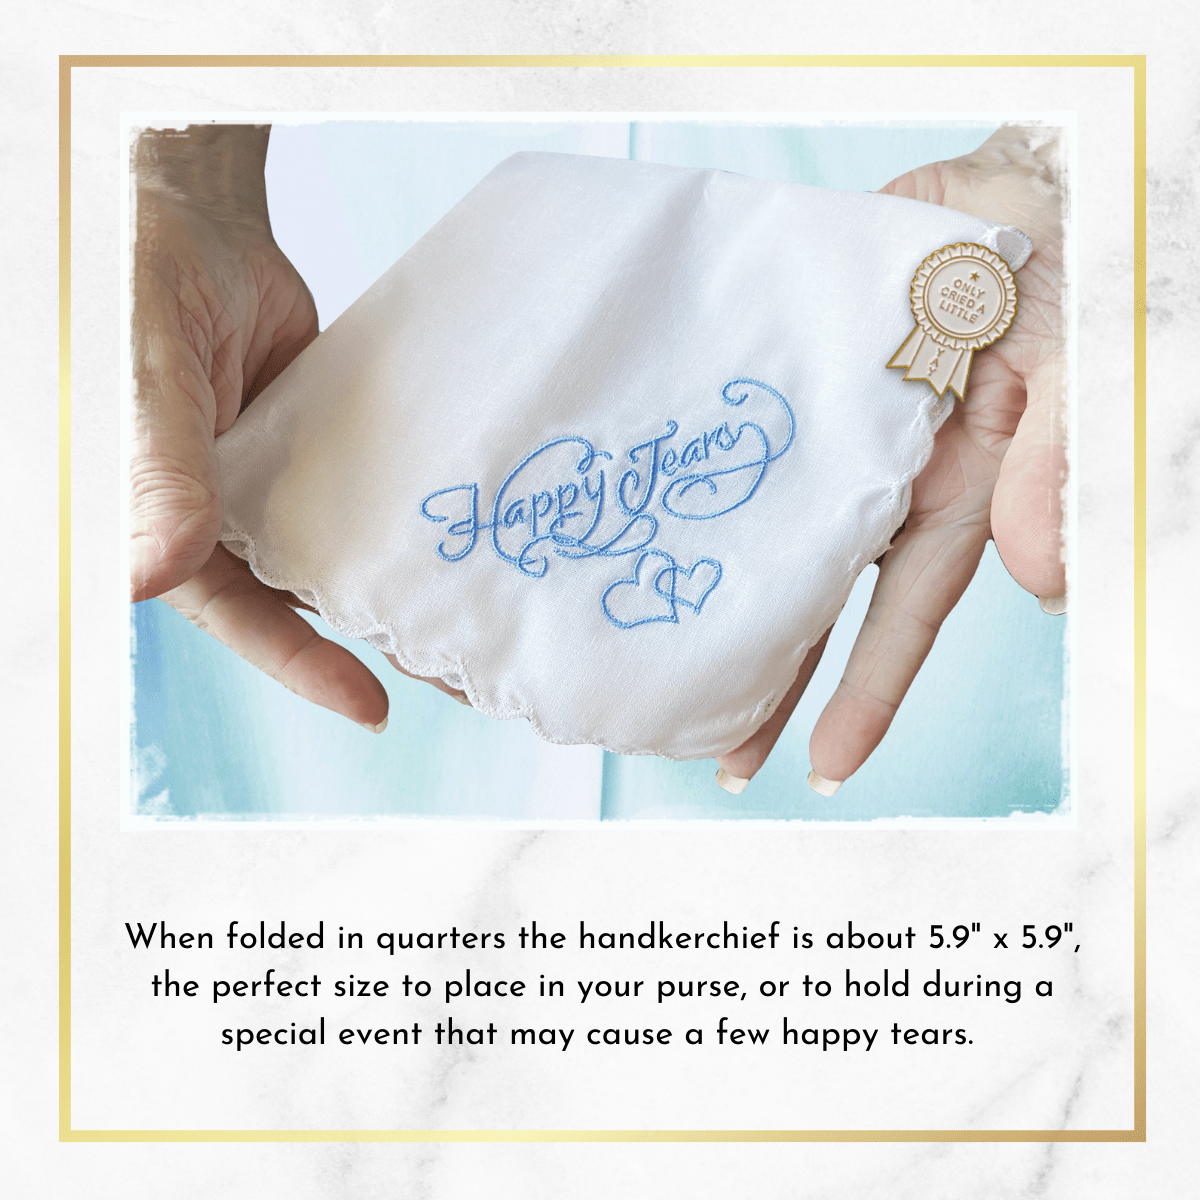 Sentimental Happy Tears Bundle Handkerchief Embroidered Only Cried a Little Pin Gift Packaging Special Occasion Keepsake   - Gutsy Goodness Handmade Jewelry